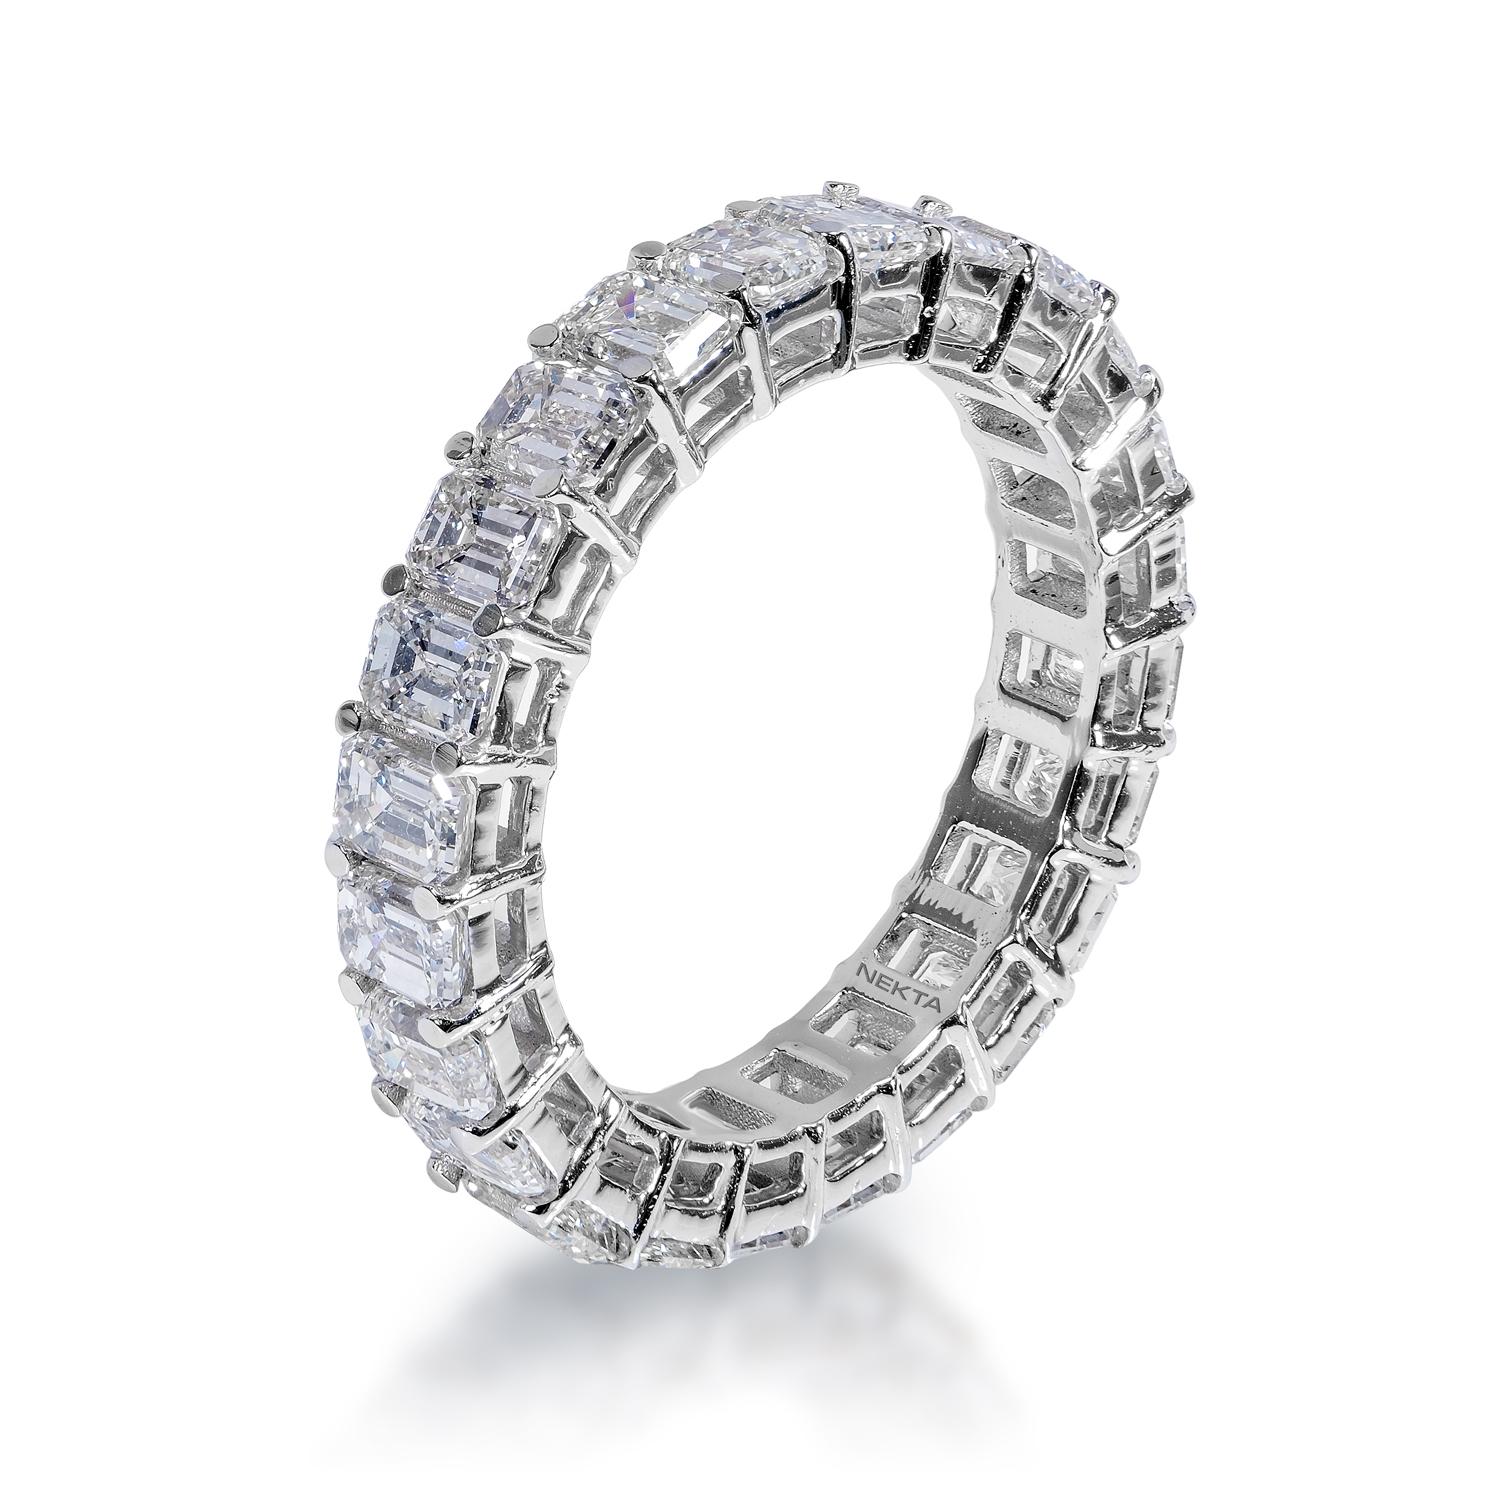 Eternity Band Diamond for Male:
Carat Weight: 4.67 Carats
Style: Emerald Cut

Setting: Shared Prong
Metal: 14 Karat White Gold 3.90 grams

Total Carat Weight: 4.67 Carats